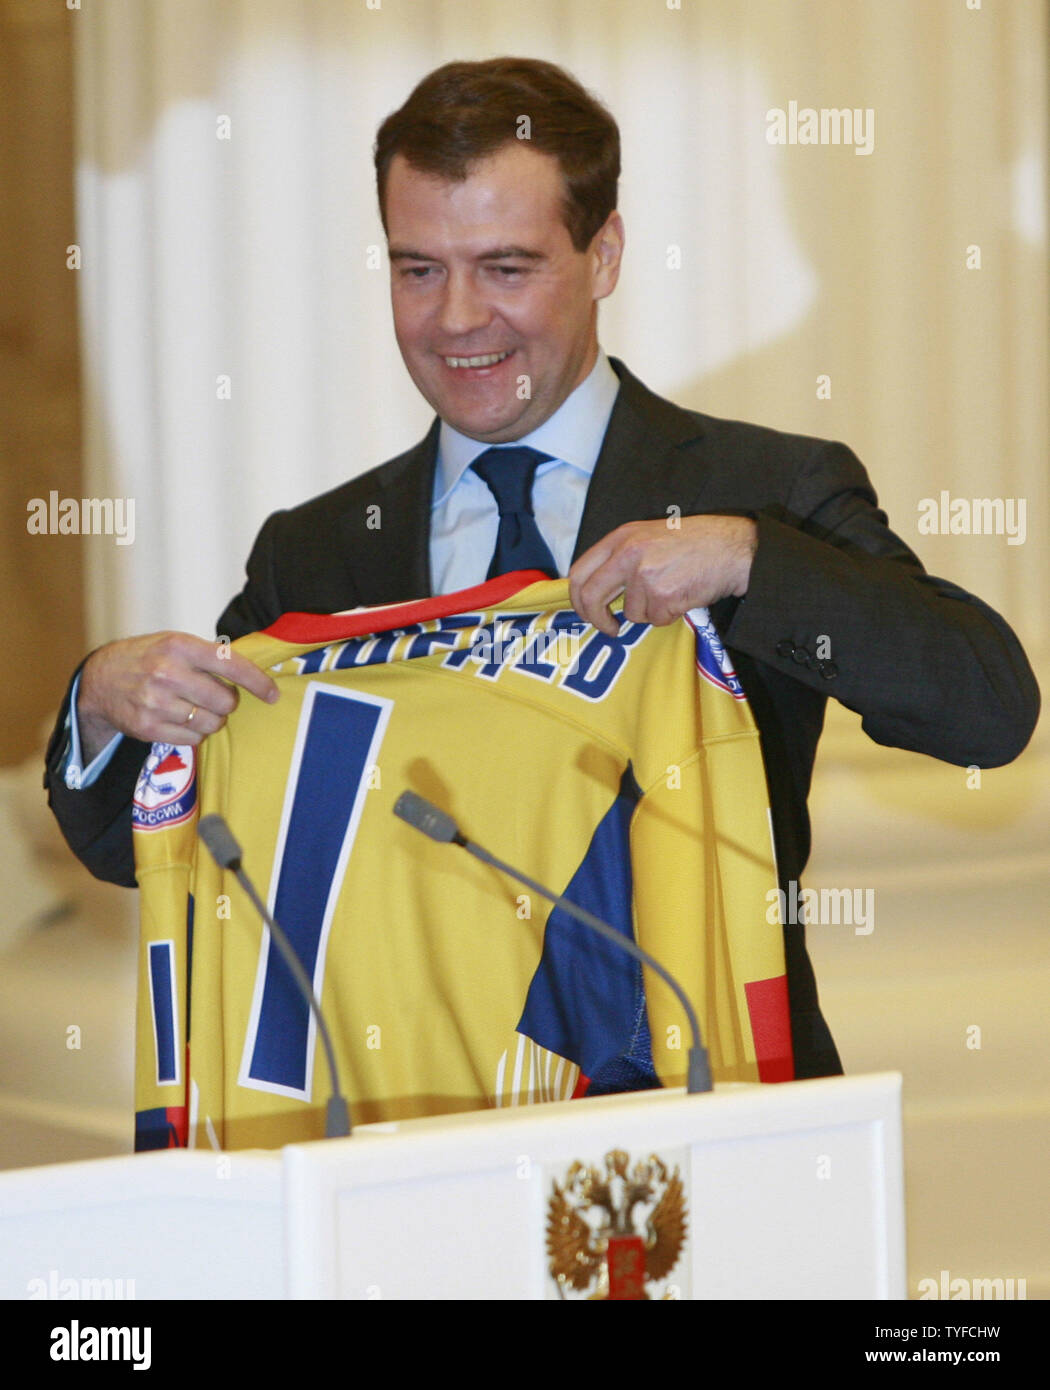 Russian President Dmitry Medvedev receives the hockey team's uniform with players' signatures during a meeting with the national ice hockey team, winner of the IIHF World Hockey Championship, in the Kremlin in Moscow on May 20, 2008. (UPI Photo/Anatoli Zhdanov) Stock Photo